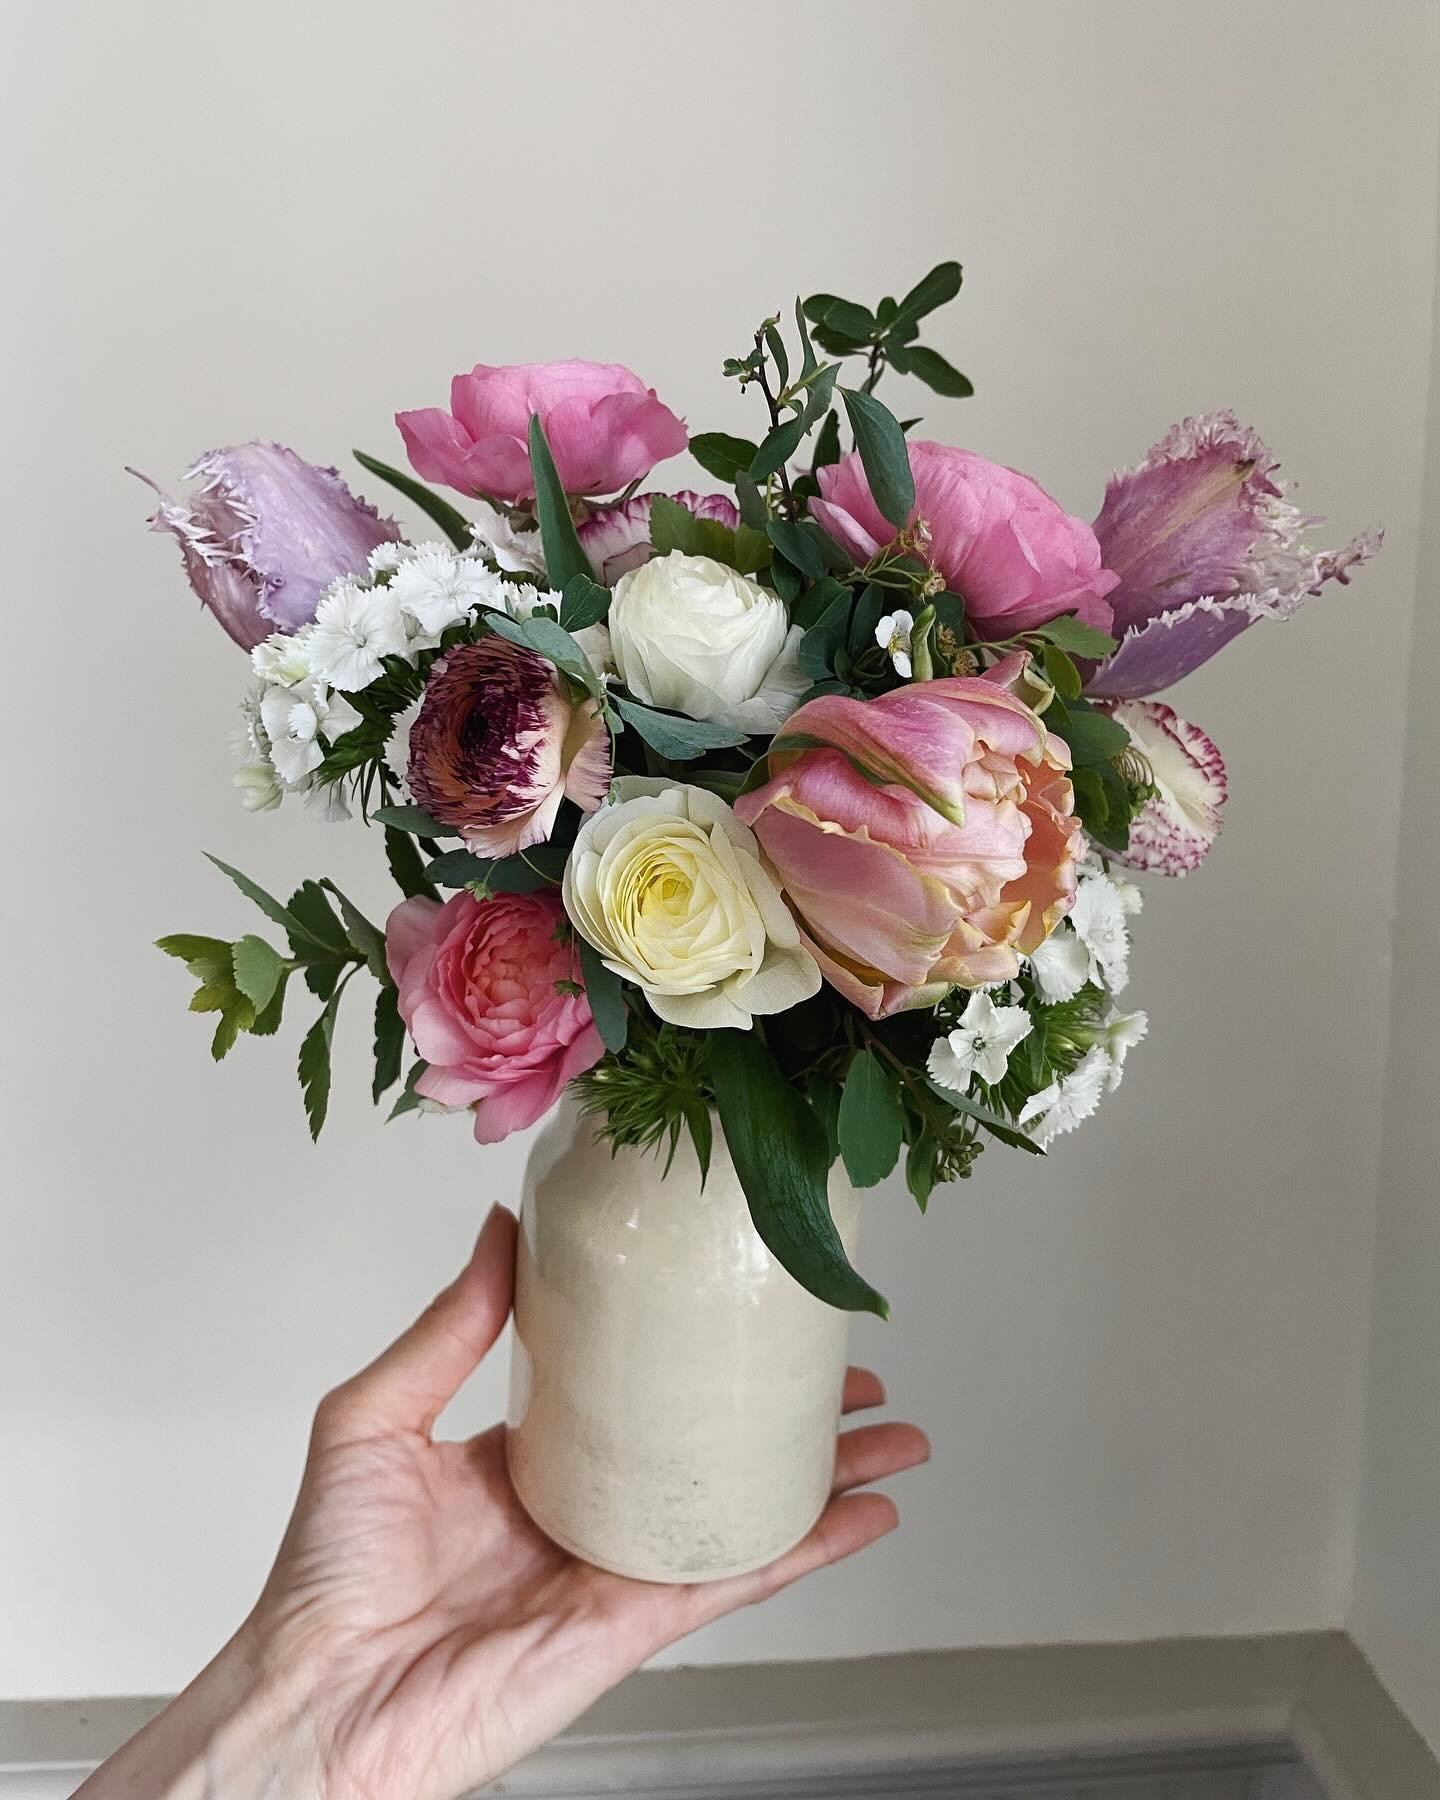 Mother&rsquo;s Day is just a week away! We've got you covered with a variety of gifts and events to help celebrate those extraordinary women in your life! 

🌻Pre-order Dayton-grown flowers in a handmade pottery vase by @gemcityceramics

Go to @backl